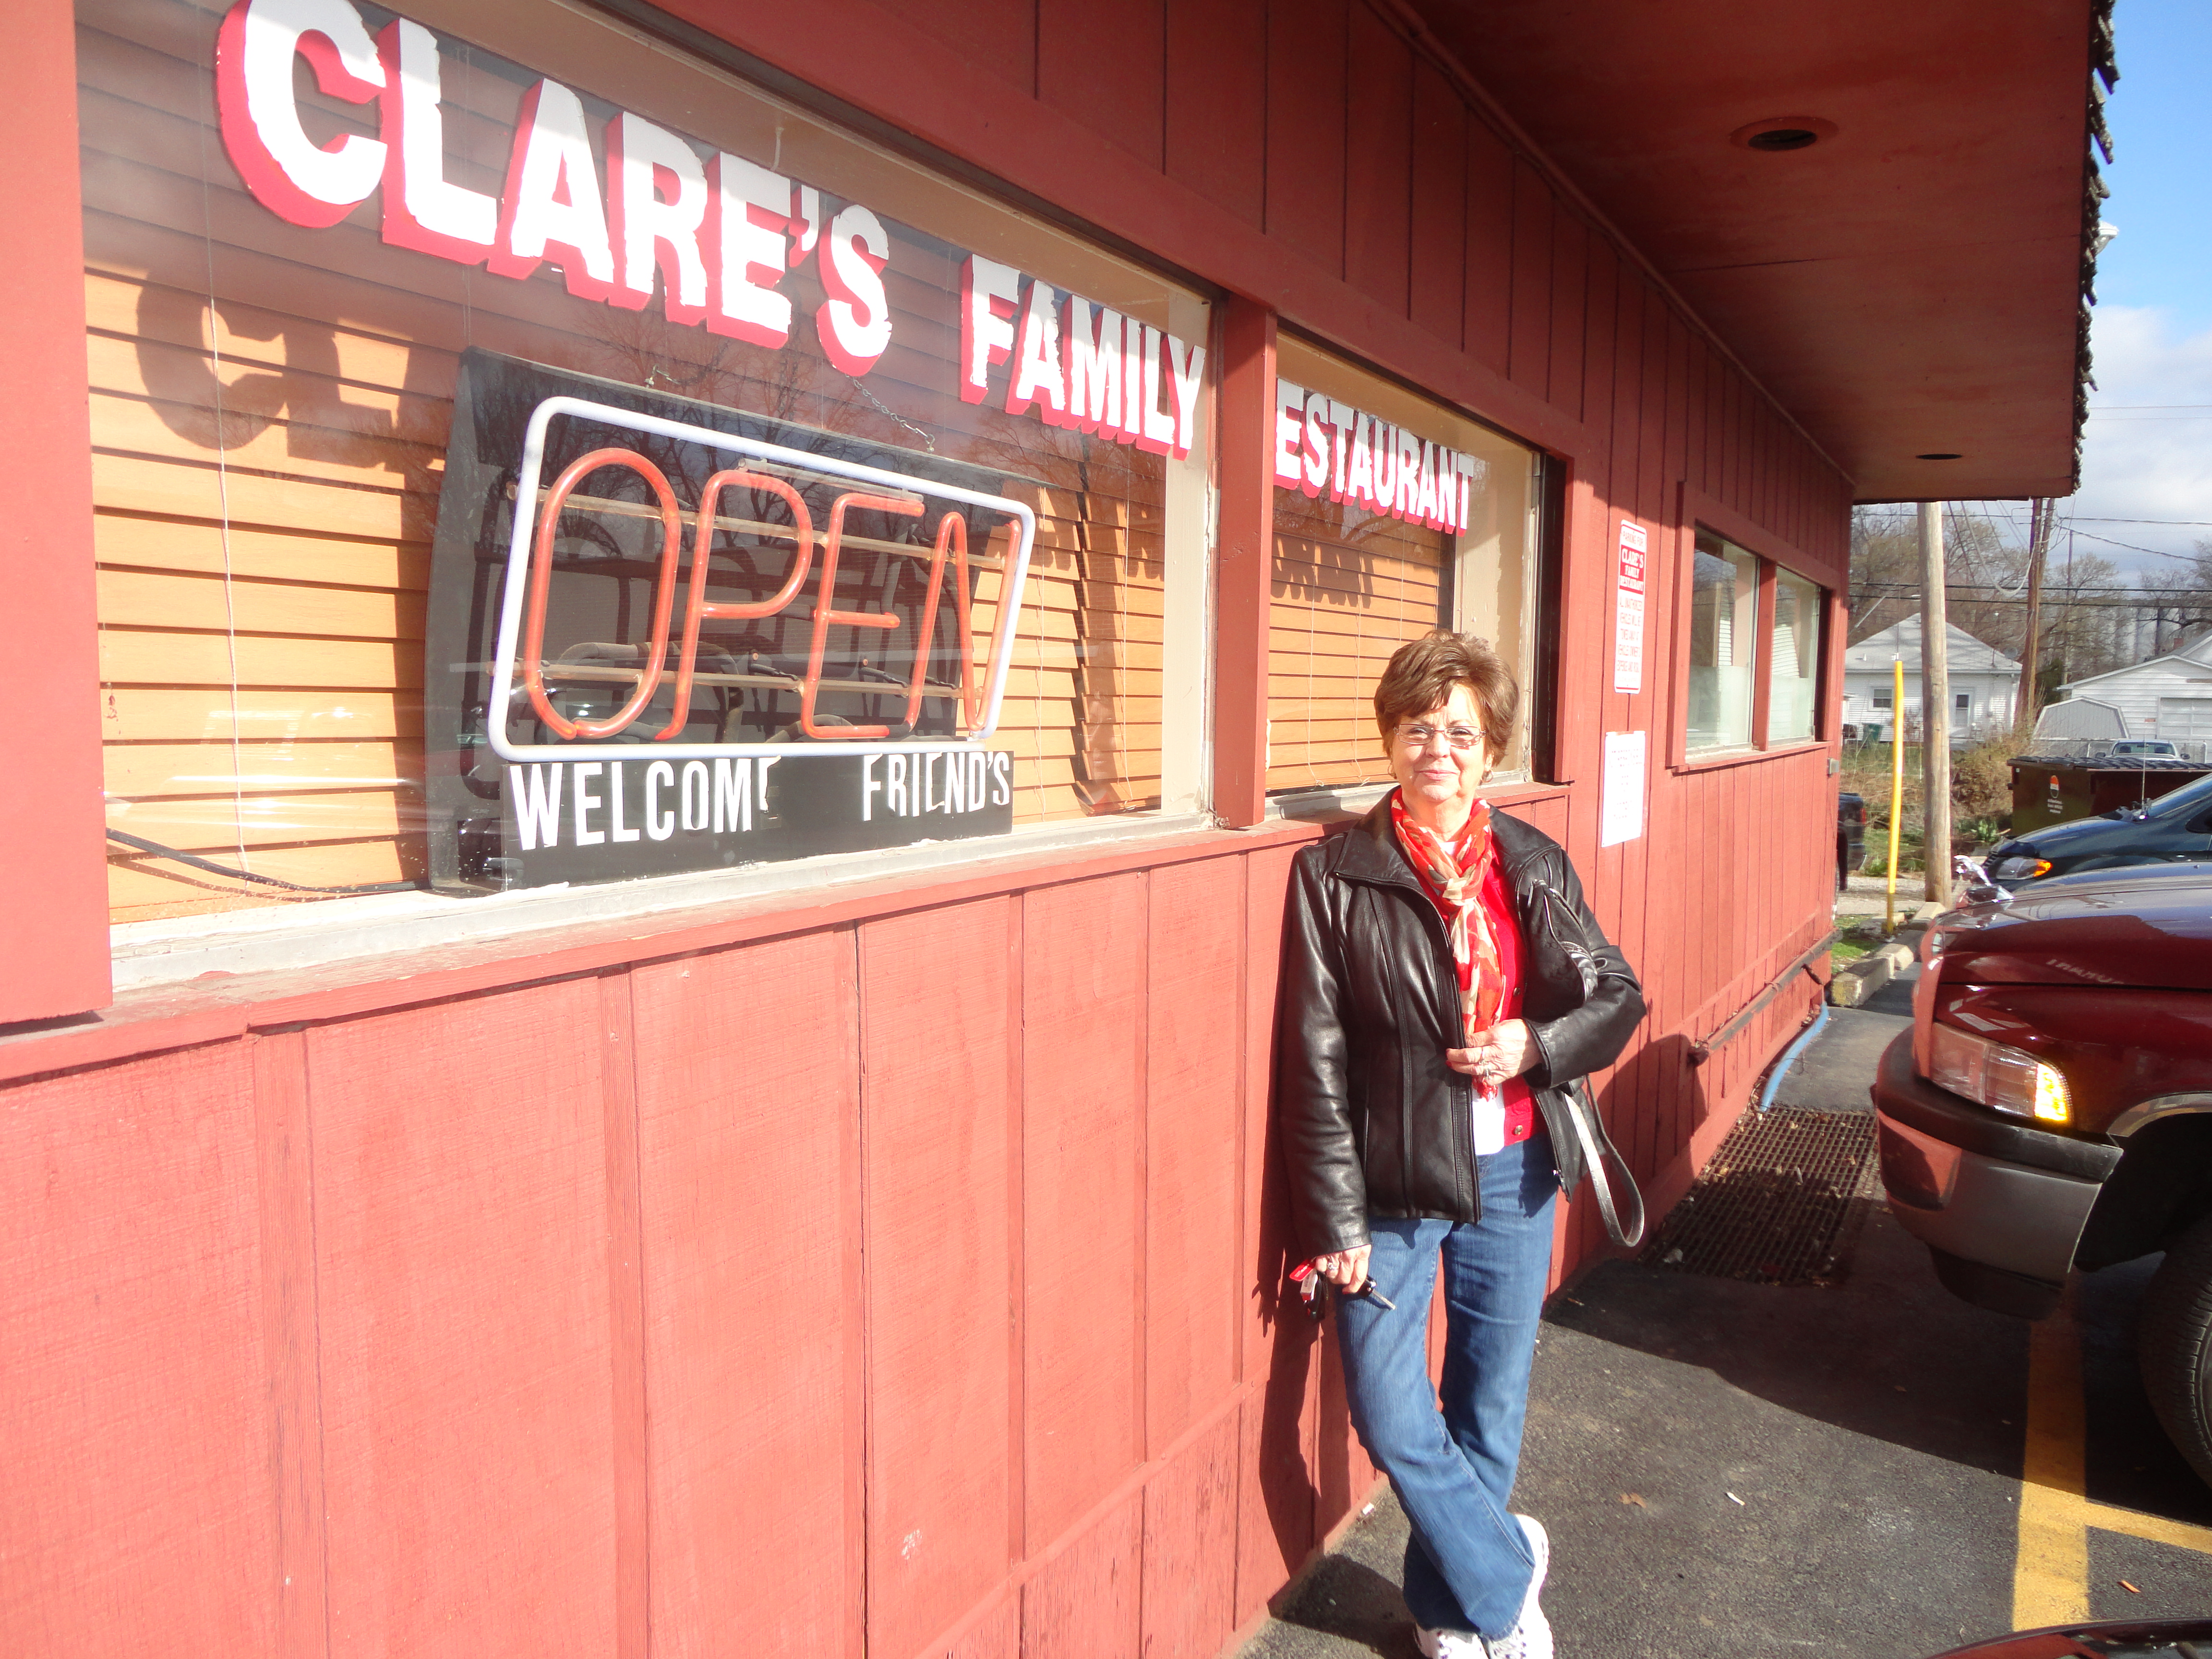 Clare's Family Restaurant, a fun find